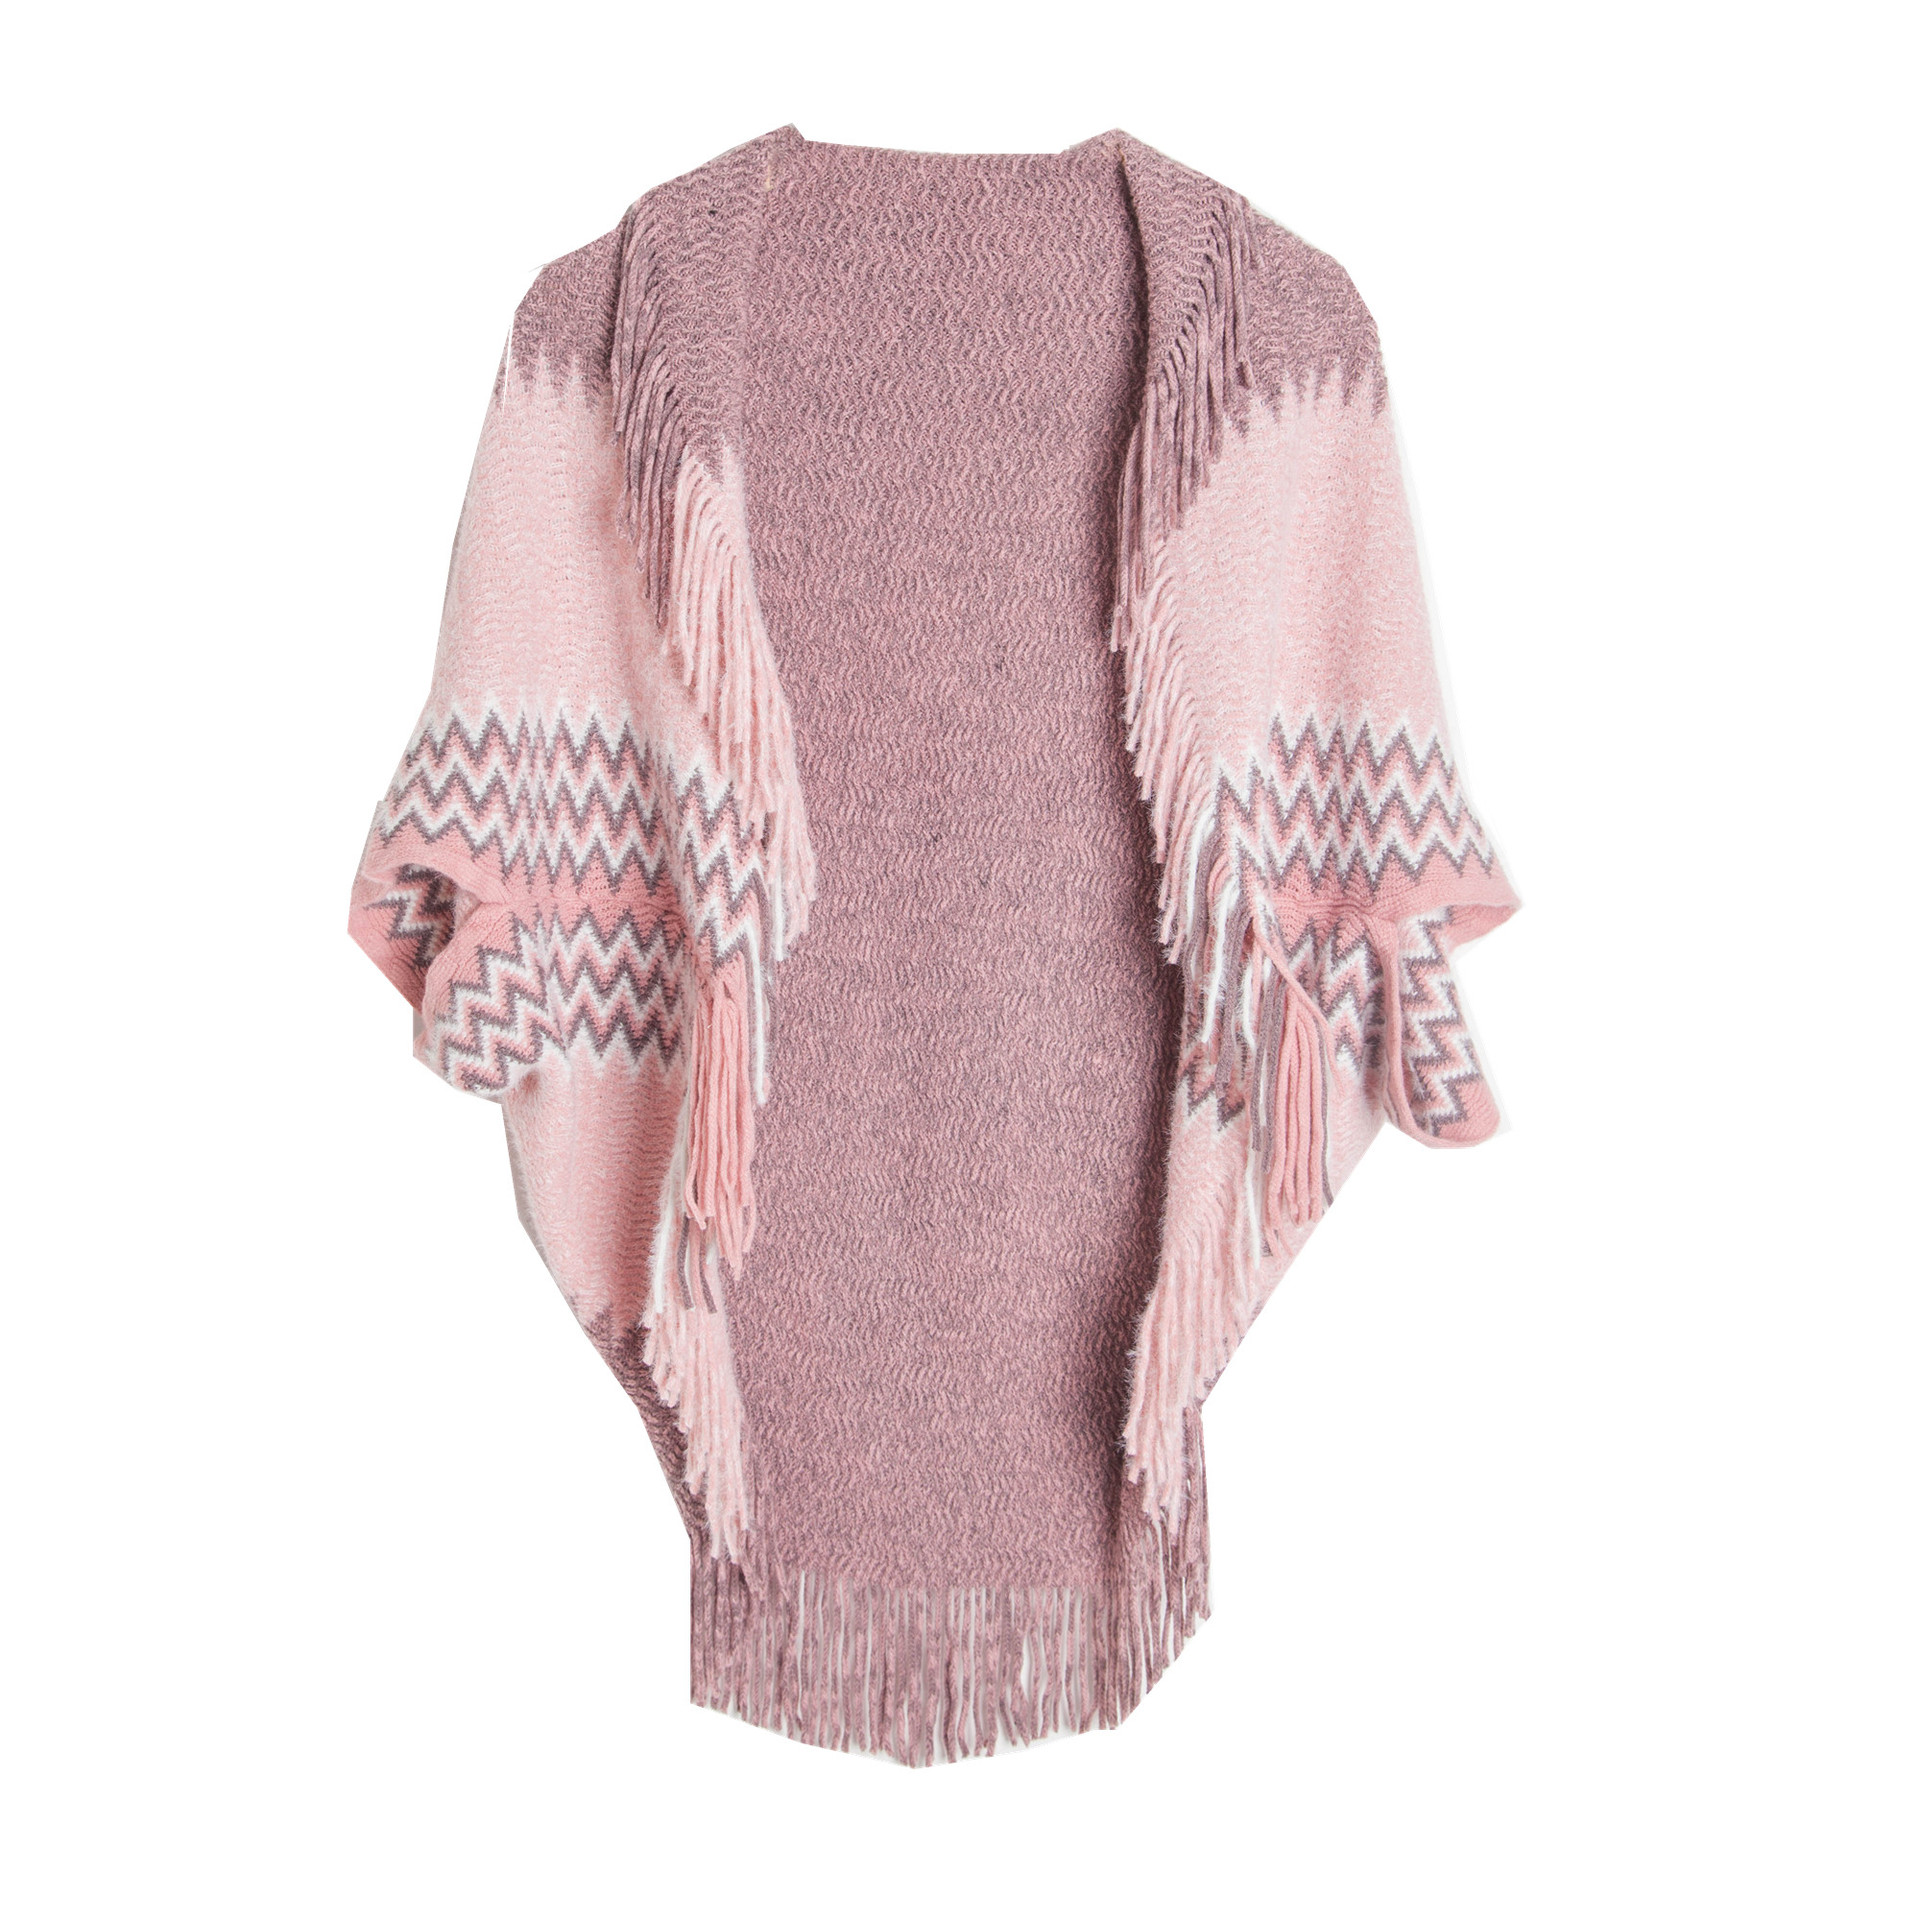 New Spring and Winter Cuff Bat Shirt for Women Knitted Fringe Cape Wowoshe